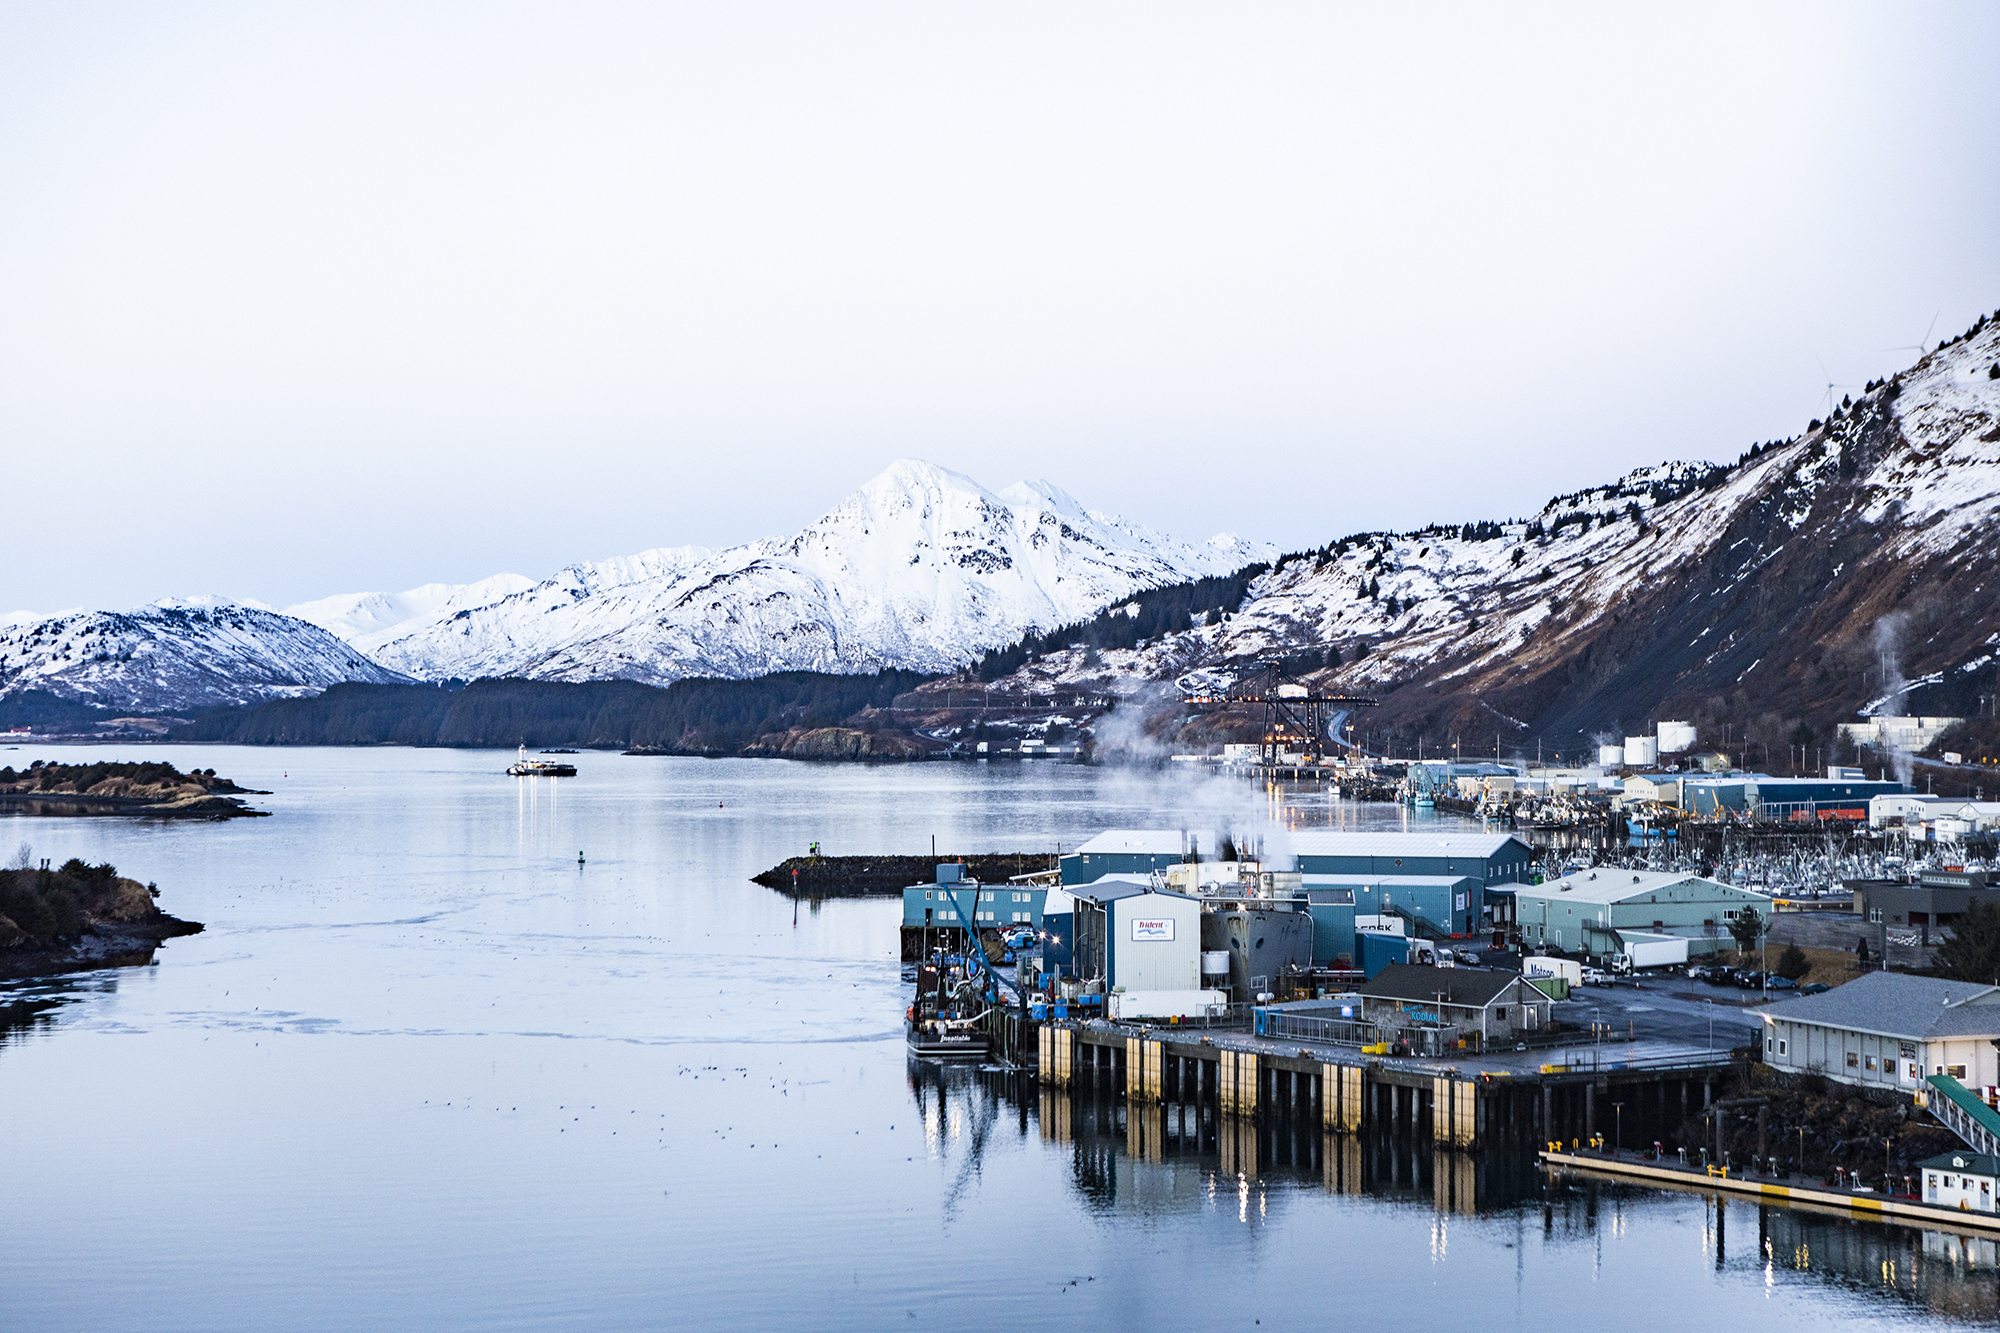 Alaska Sea Grant | A seaside station on the water in front of large snowy mountains | UAF photo by JR Ancheta.